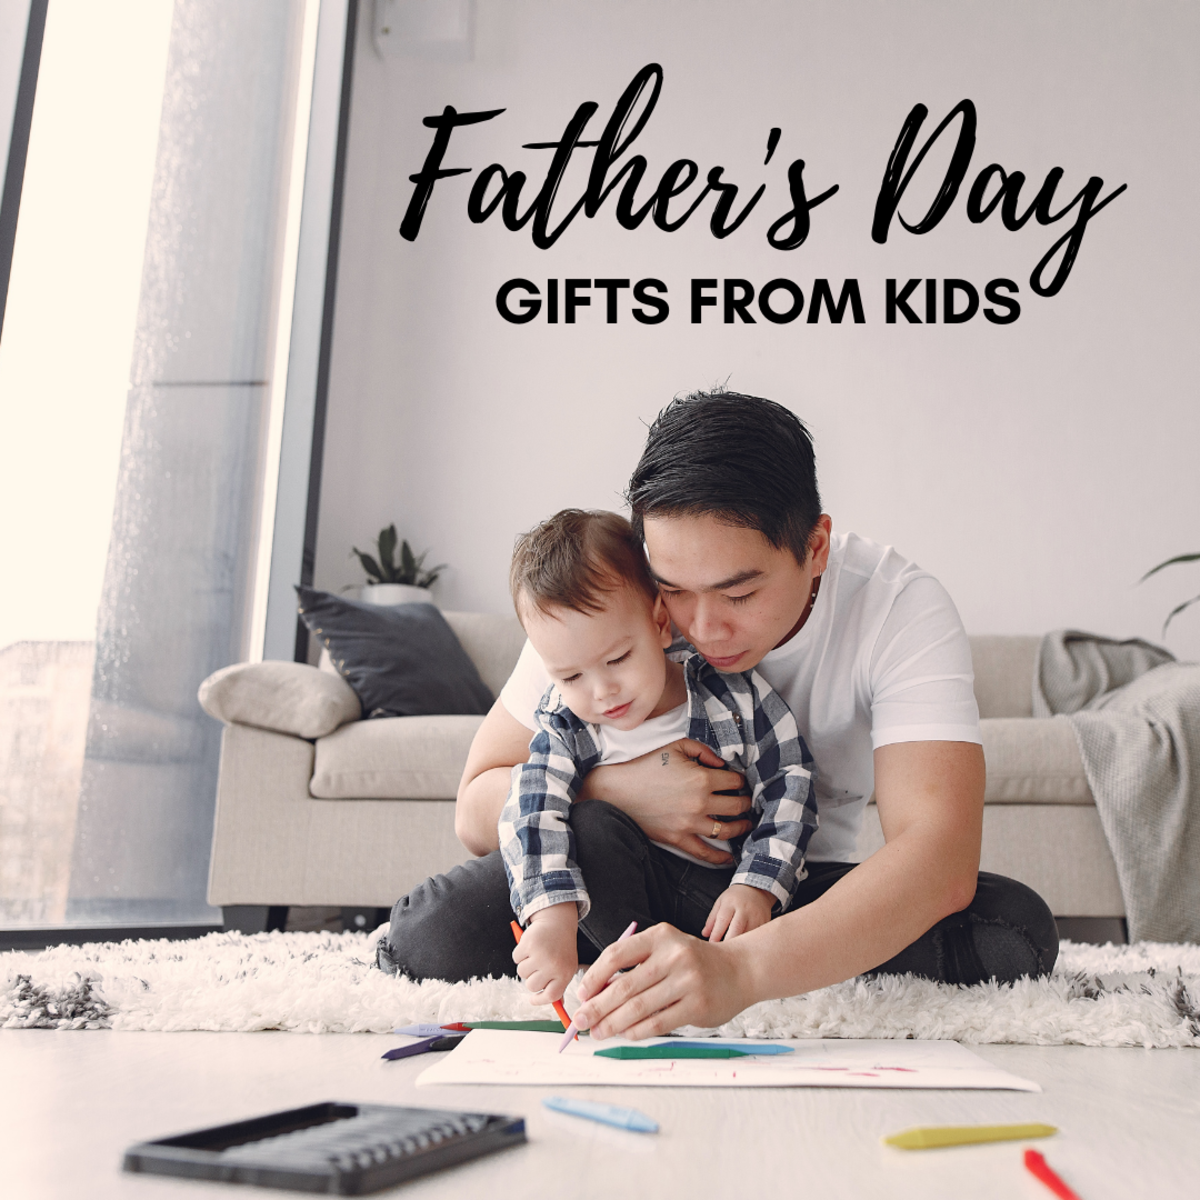 7 Awesome Homemade Father’s Day Gift Ideas From Kids